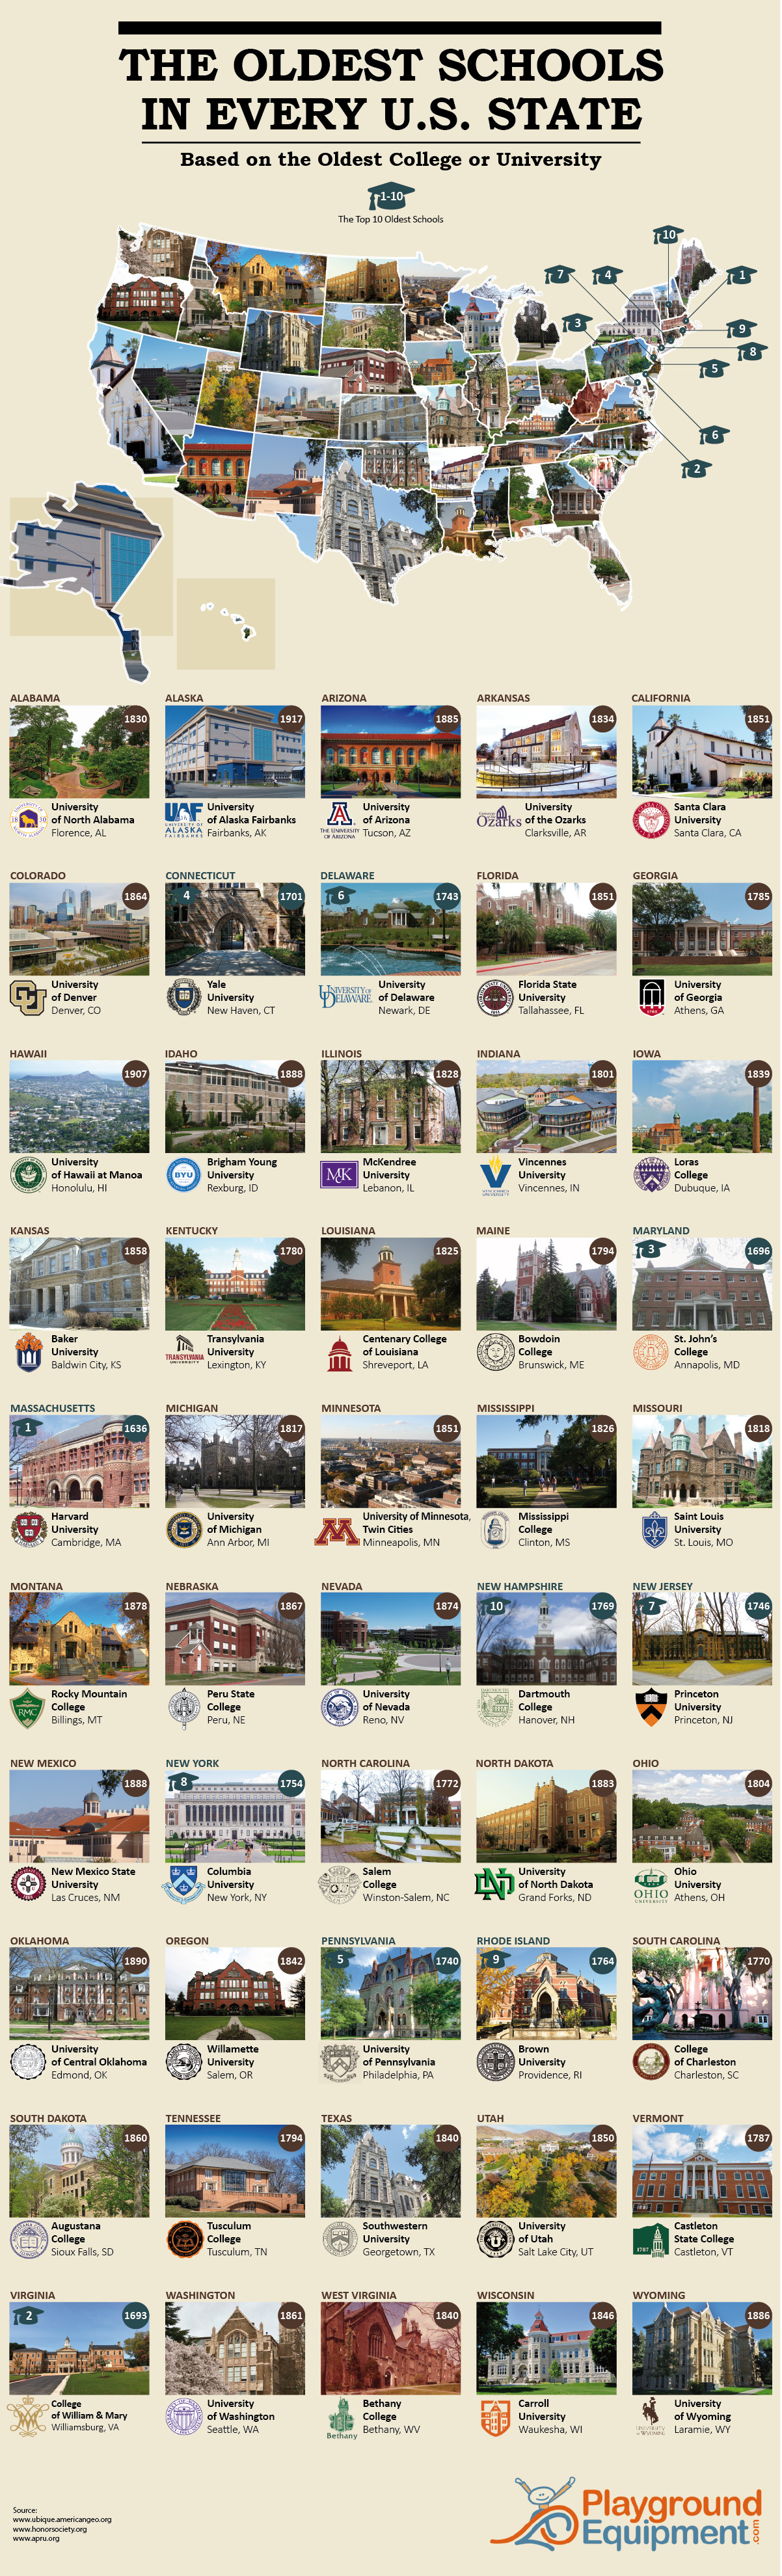 The Oldest Schools in Every U.S. State (Colleges and Universities) - PlaygroundEquipment.com - Infographic